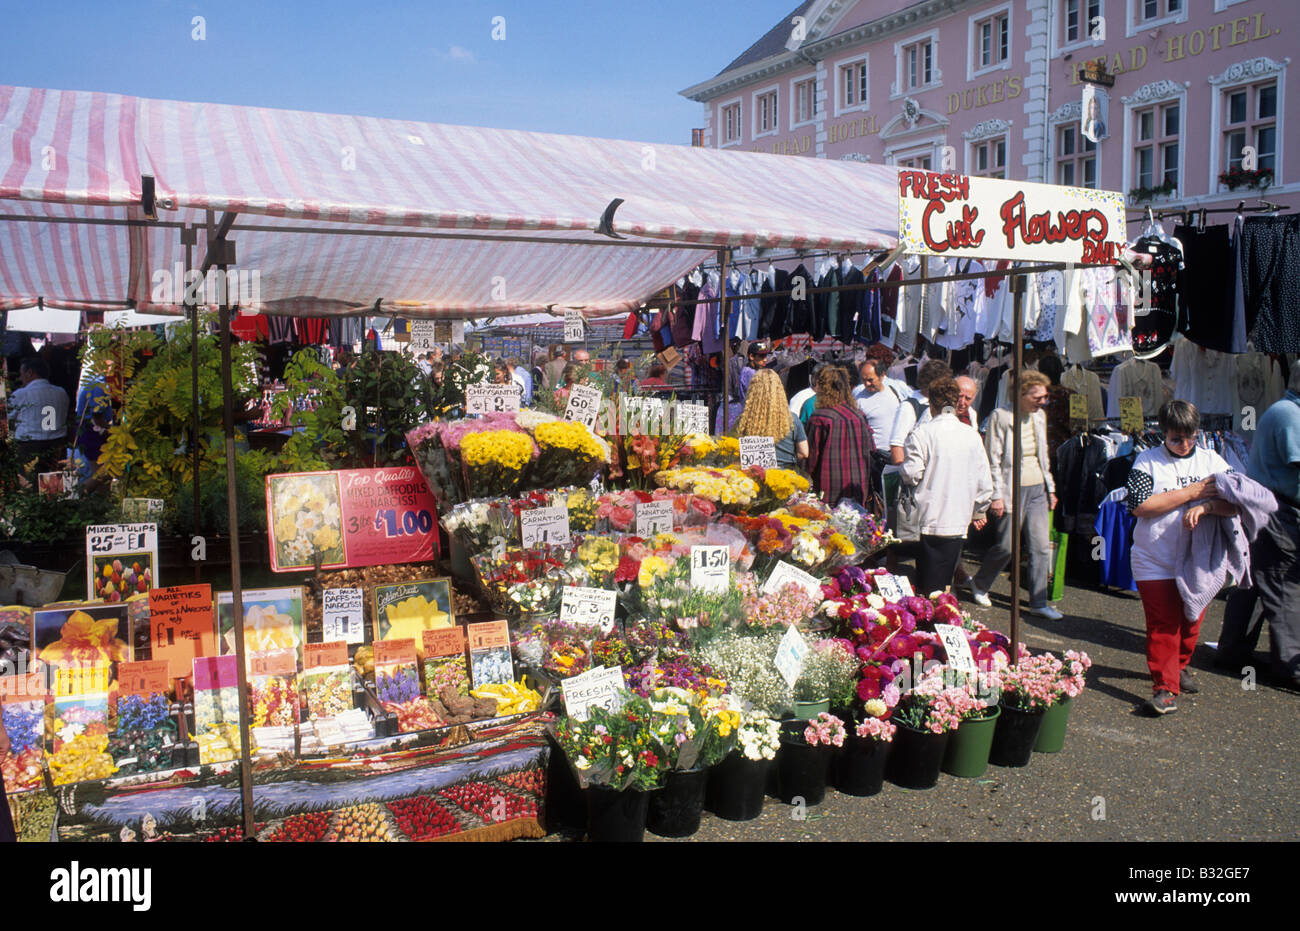 Tuesday Market Place cut flower stall Kings Lynn East Anglia England UK shopping produce shoppers buyers weekly Stock Photo